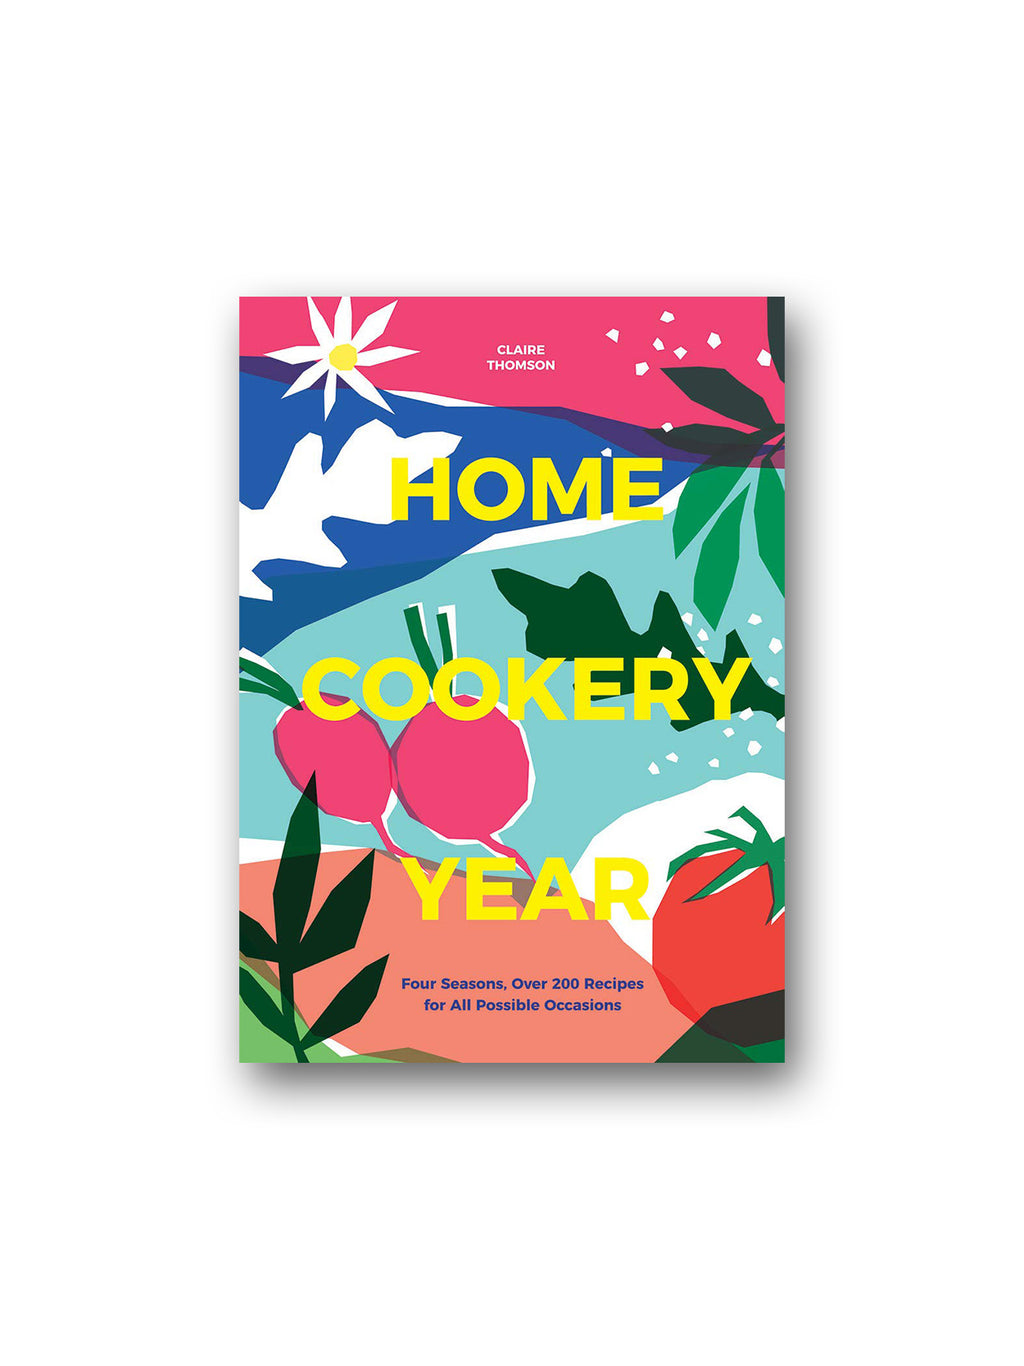 Home Cookery Year : Four Seasons, Over 200 Recipes for All Possible Occasions